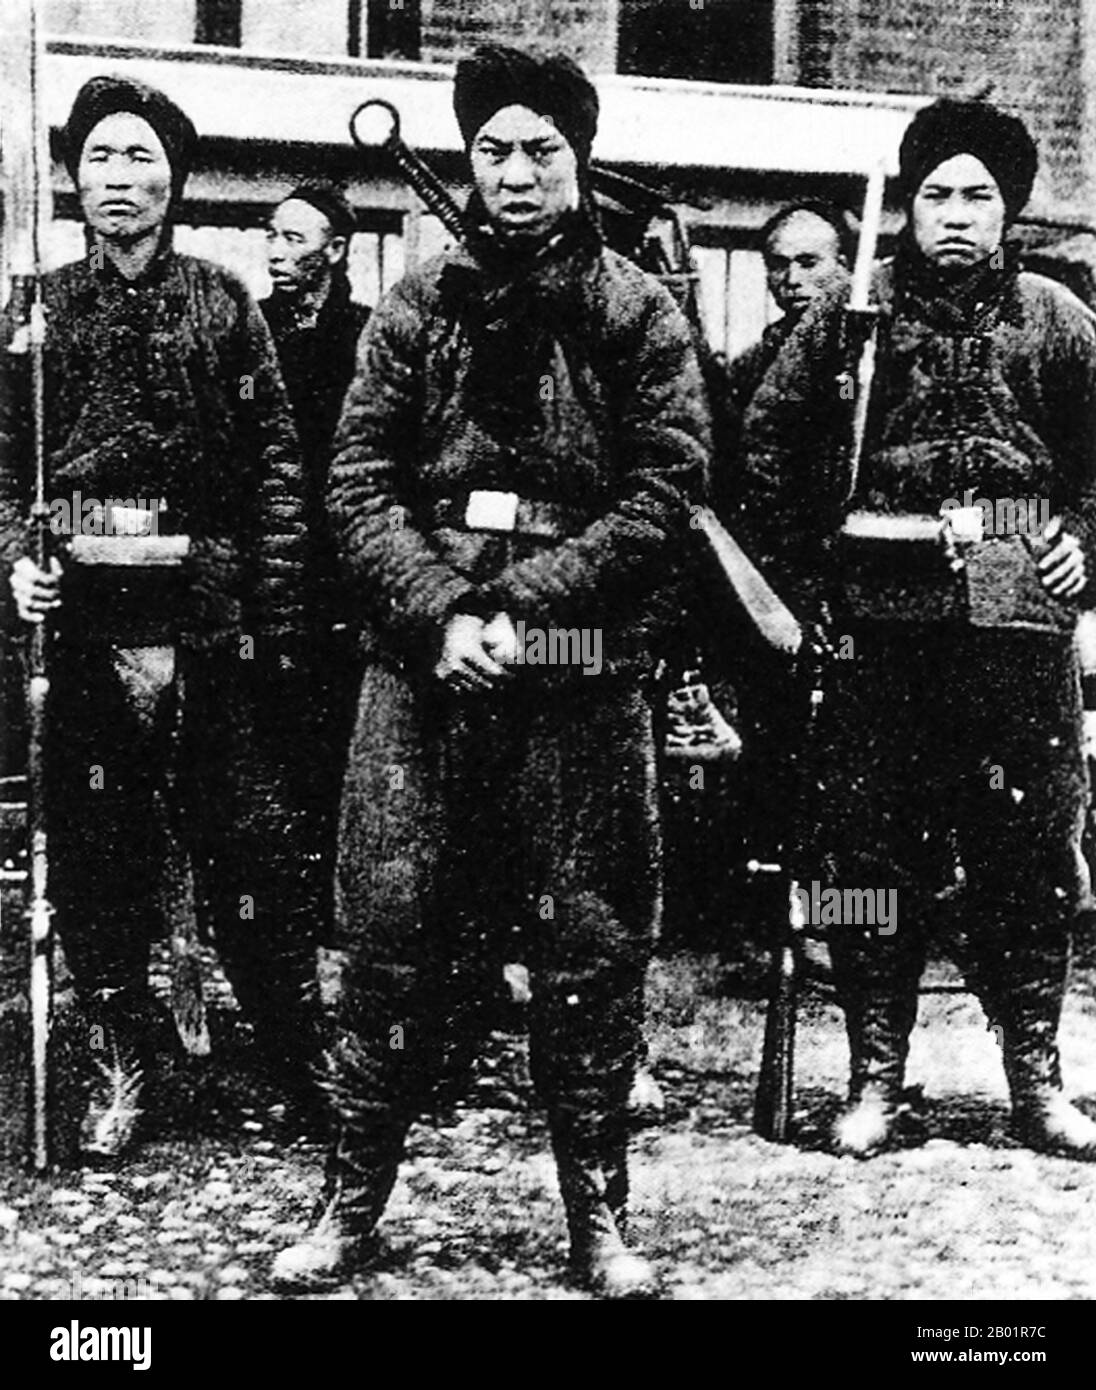 China: Boxer soldiers in Beijing, 1899-1900.  The Boxer Rebellion, also known as Boxer Uprising or Yihetuan Movement, was a proto-nationalist movement by the Righteous Harmony Society in China between 1898 and 1901, opposing foreign imperialism and Christianity.  The uprising took place in response to foreign spheres of influence in China, with grievances ranging from opium traders, political invasion, economic manipulation, to missionary evangelism. In China, popular sentiment remained resistant to foreign influences, and anger rose over the 'unequal treaties'. Stock Photo